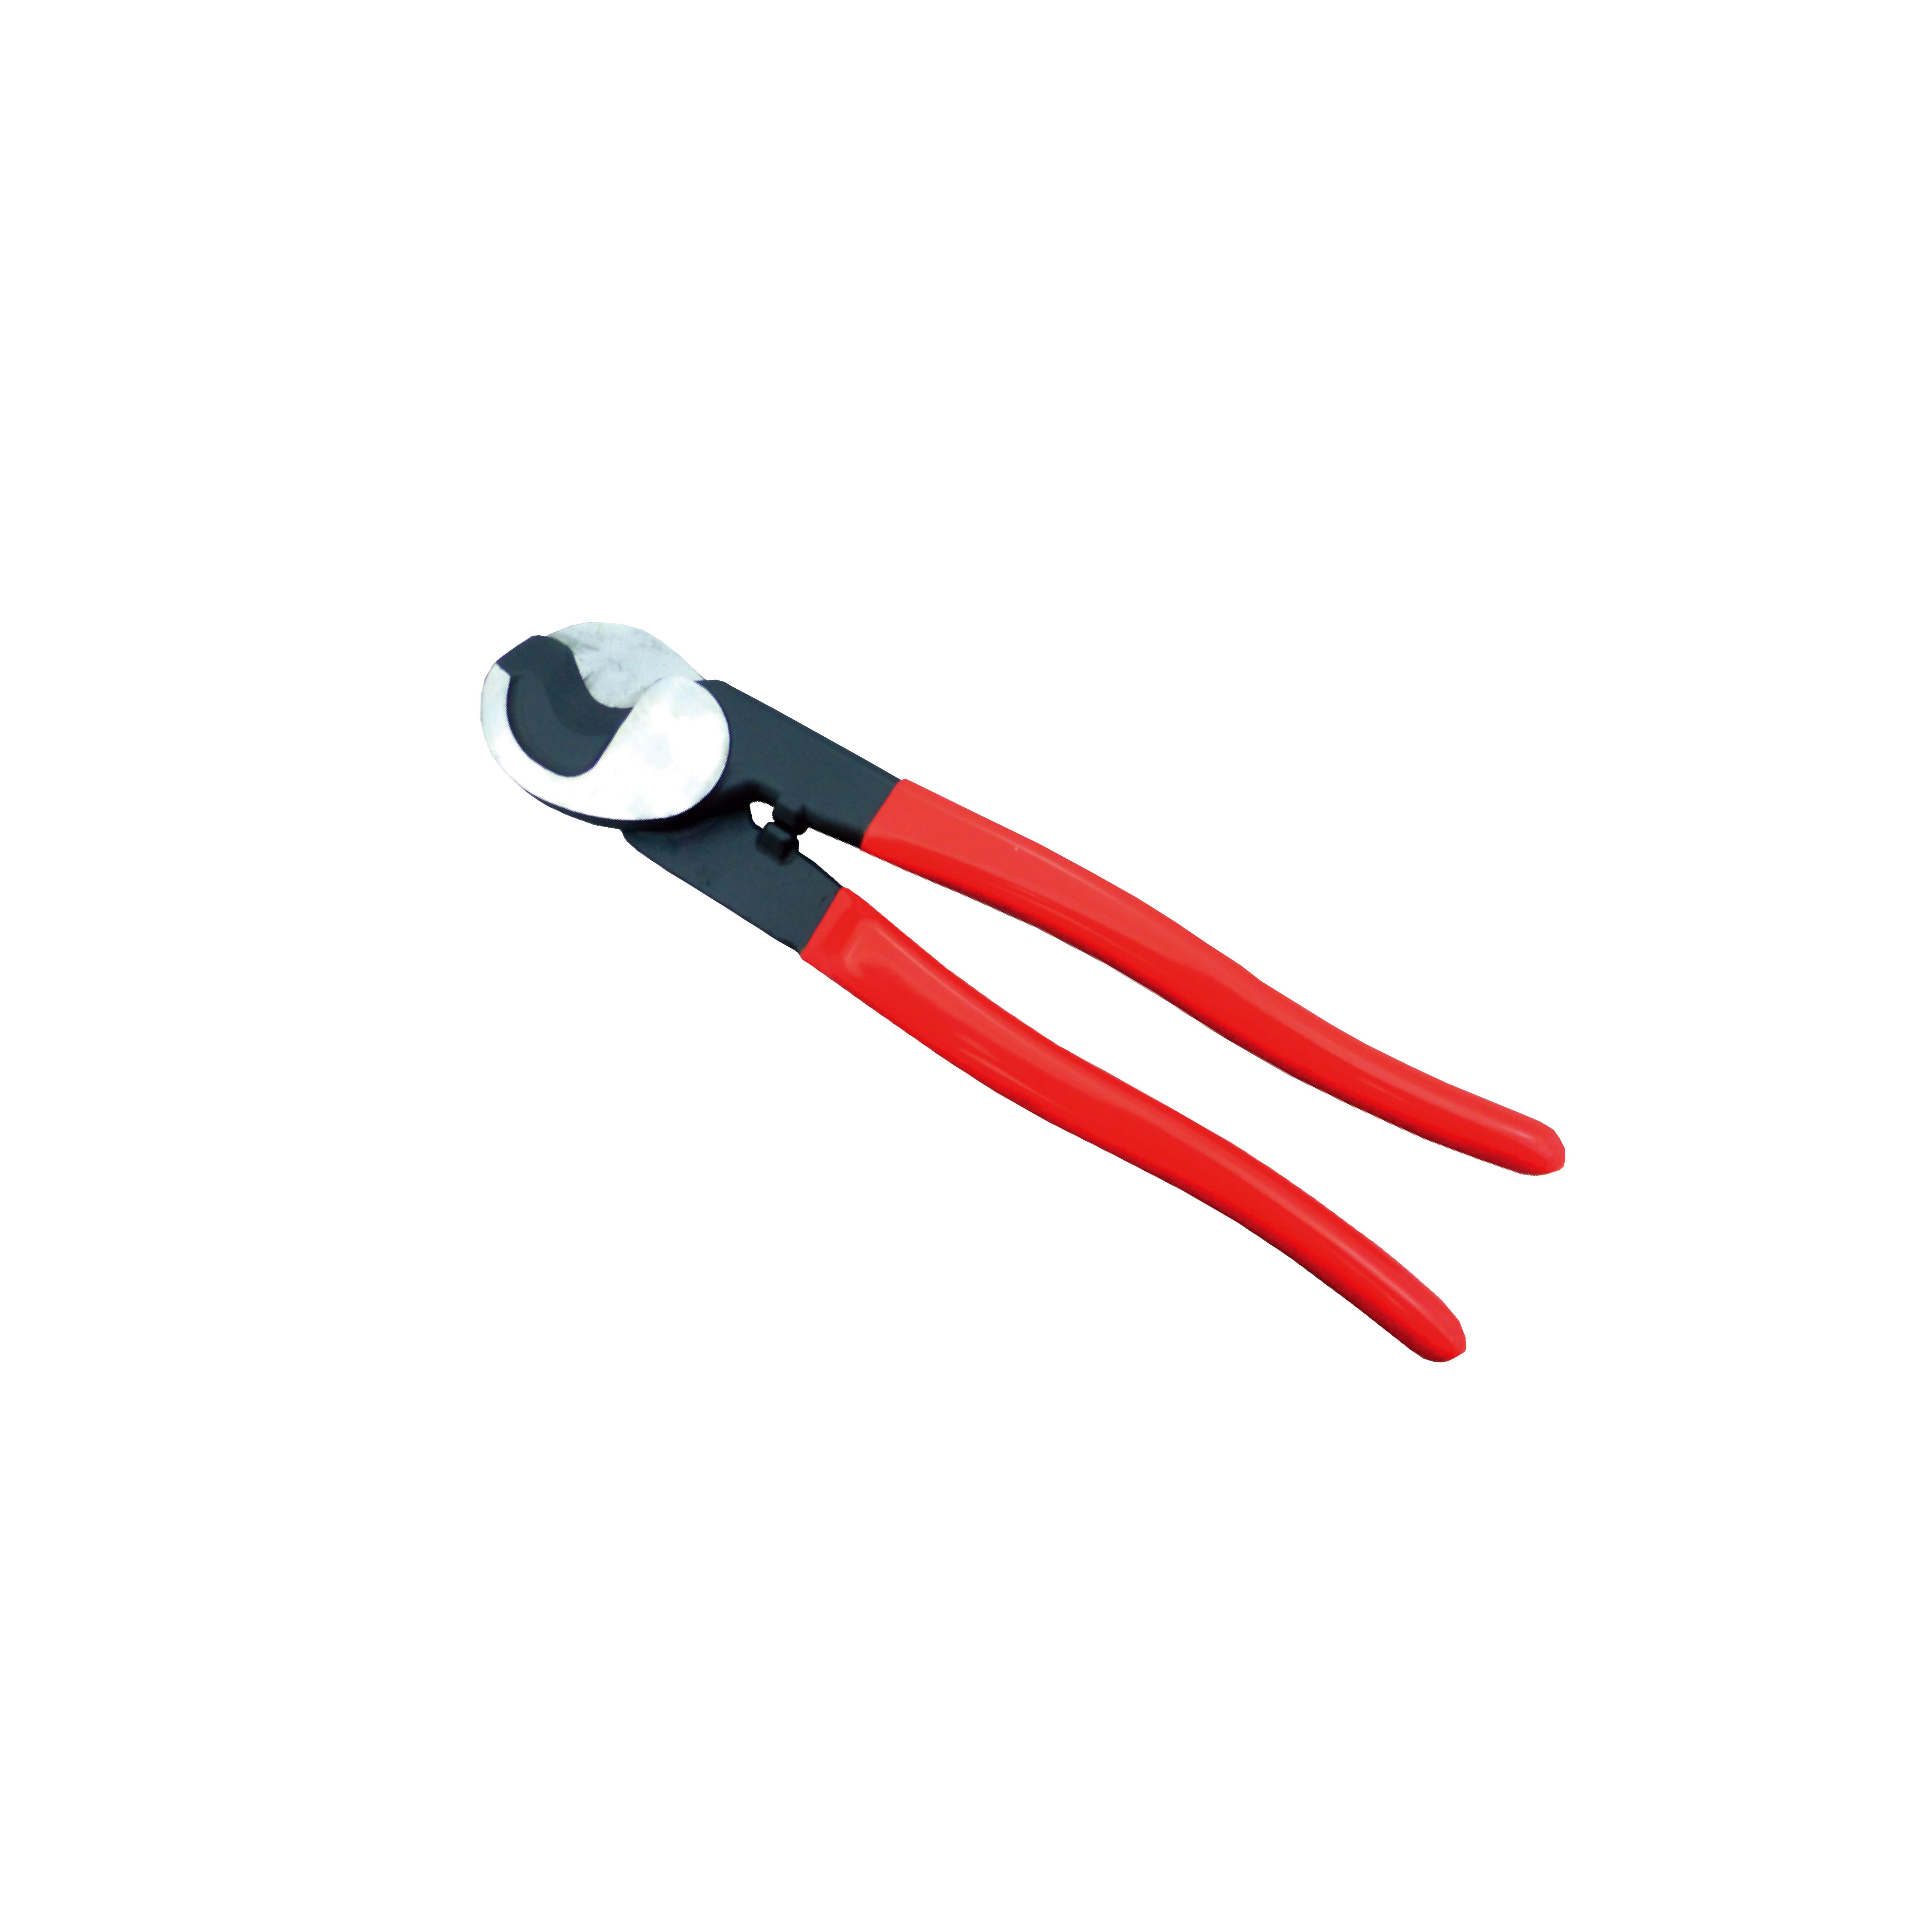 LK-70A HAND CABLE CUTTERS-LK-70A 